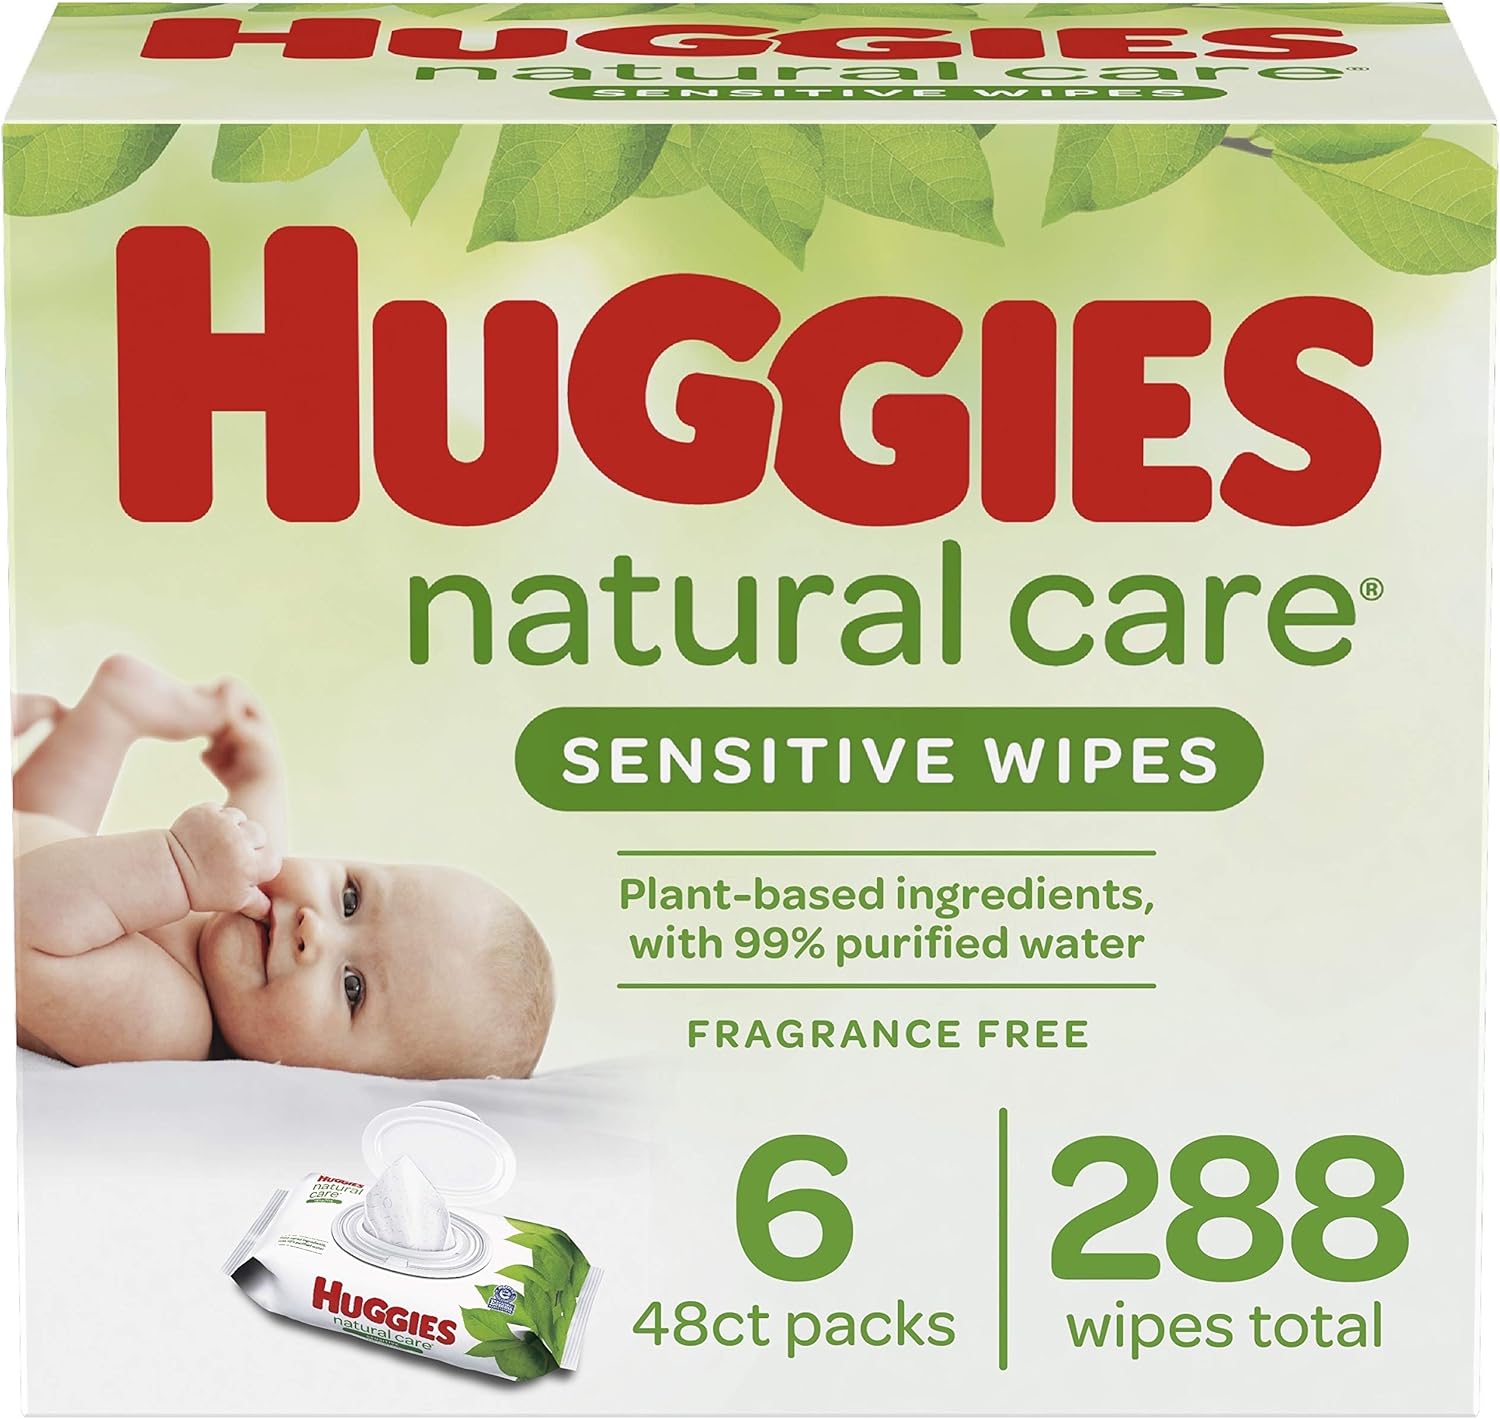 Huggies Natural Care Sensitive Baby Wipes, Unscented, 6 Flip-Top Packs, 48 Count (Pack of 6) - image 1 of 8